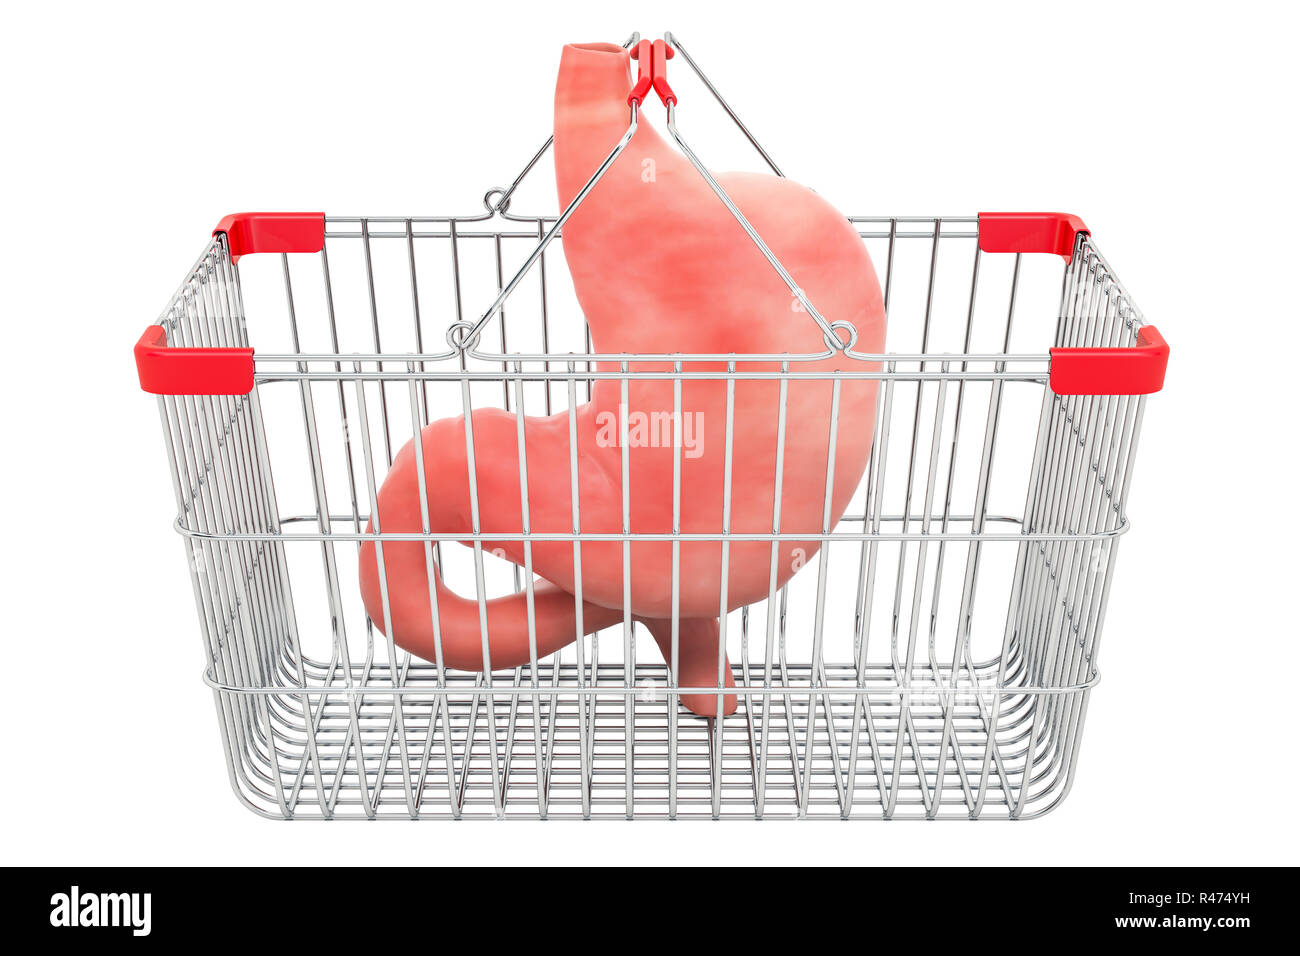 stomach in shopping basket, 3D rendering isolated on white background Stock Photo